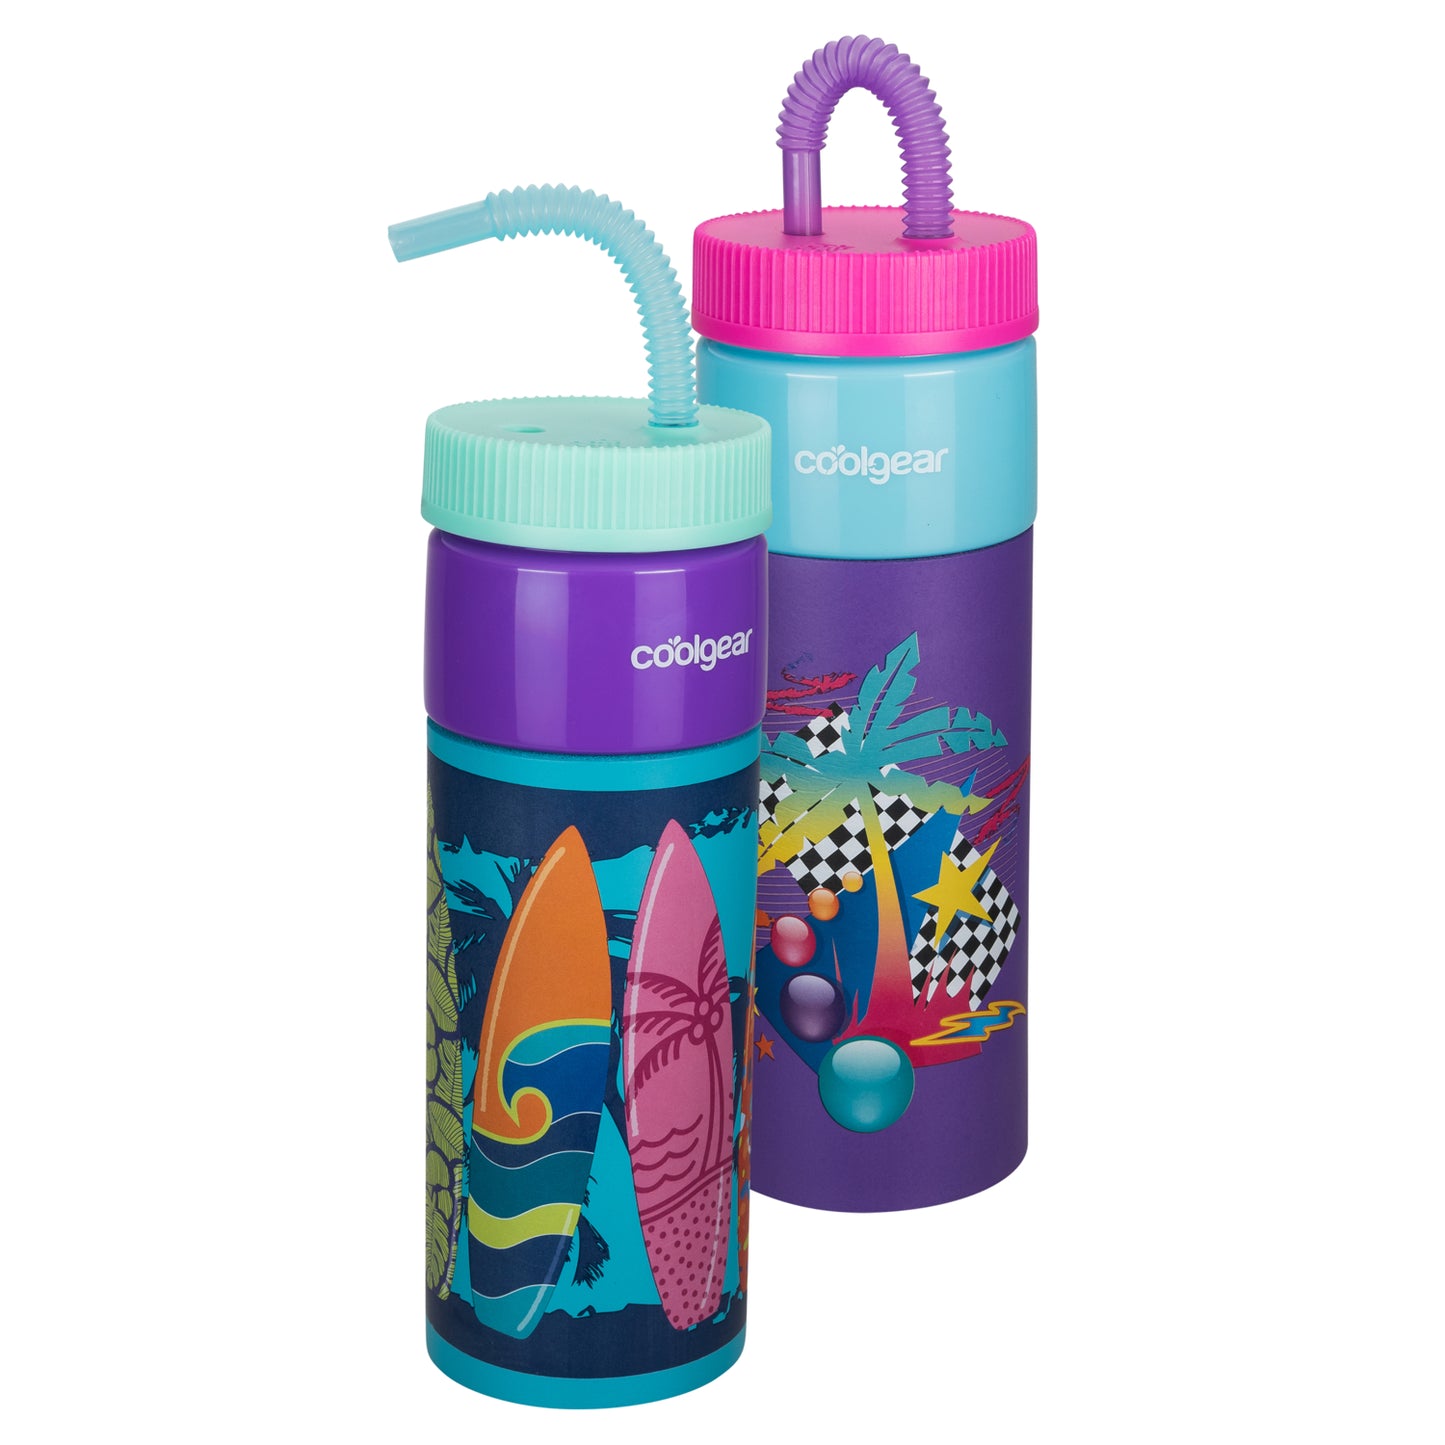 Cool Gear 24oz Go Grip! Plastic Retro Squishy Water Bottle | Cute Printed Design, Foam Grip, Resealable Bendy Straw | Dishwasher Safe - Summer Drinkware for Kids, Adults, Gifts and More